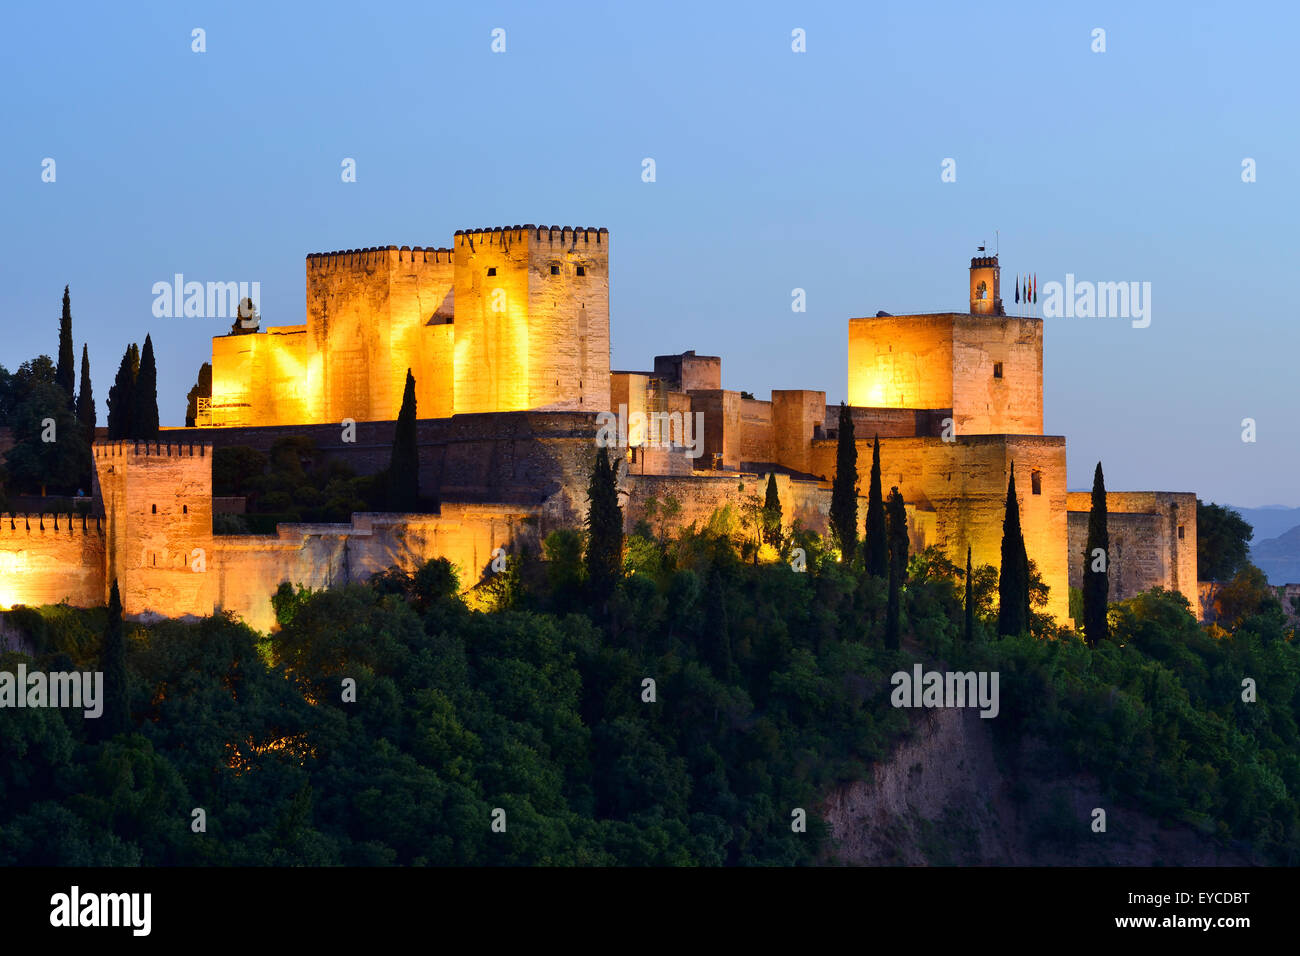 View of Alcazaba towers at dusk within the Alhambra Palace complex in Granada, Andalusia, Spain Stock Photo